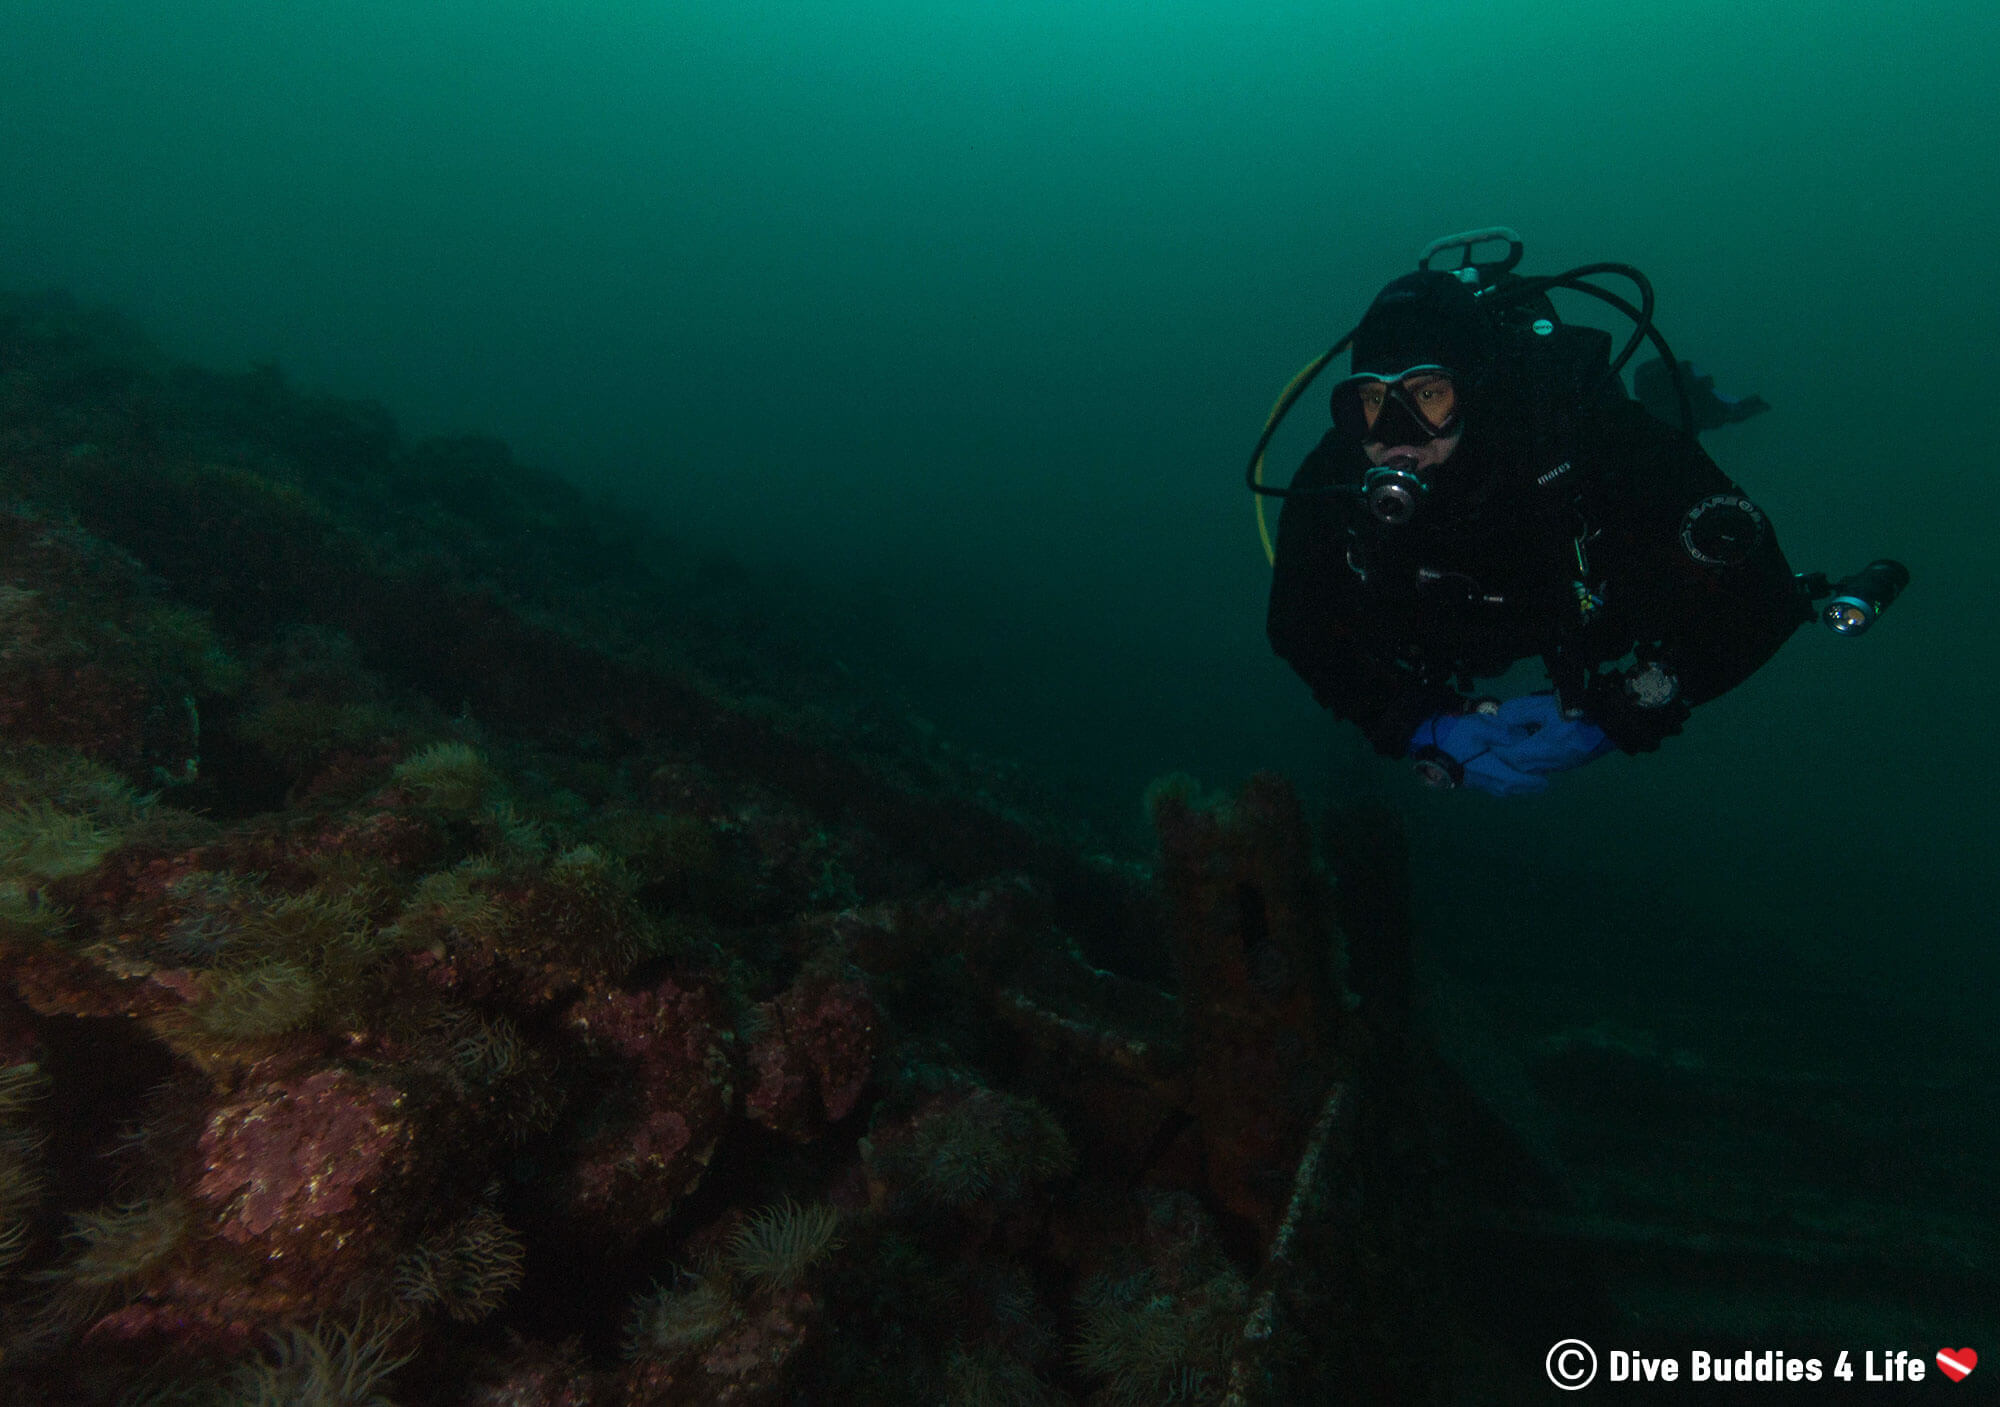 Joey Scuba Diving And Checking Out The Berlengas Shipwreck In Peniche, Portugal, Europe